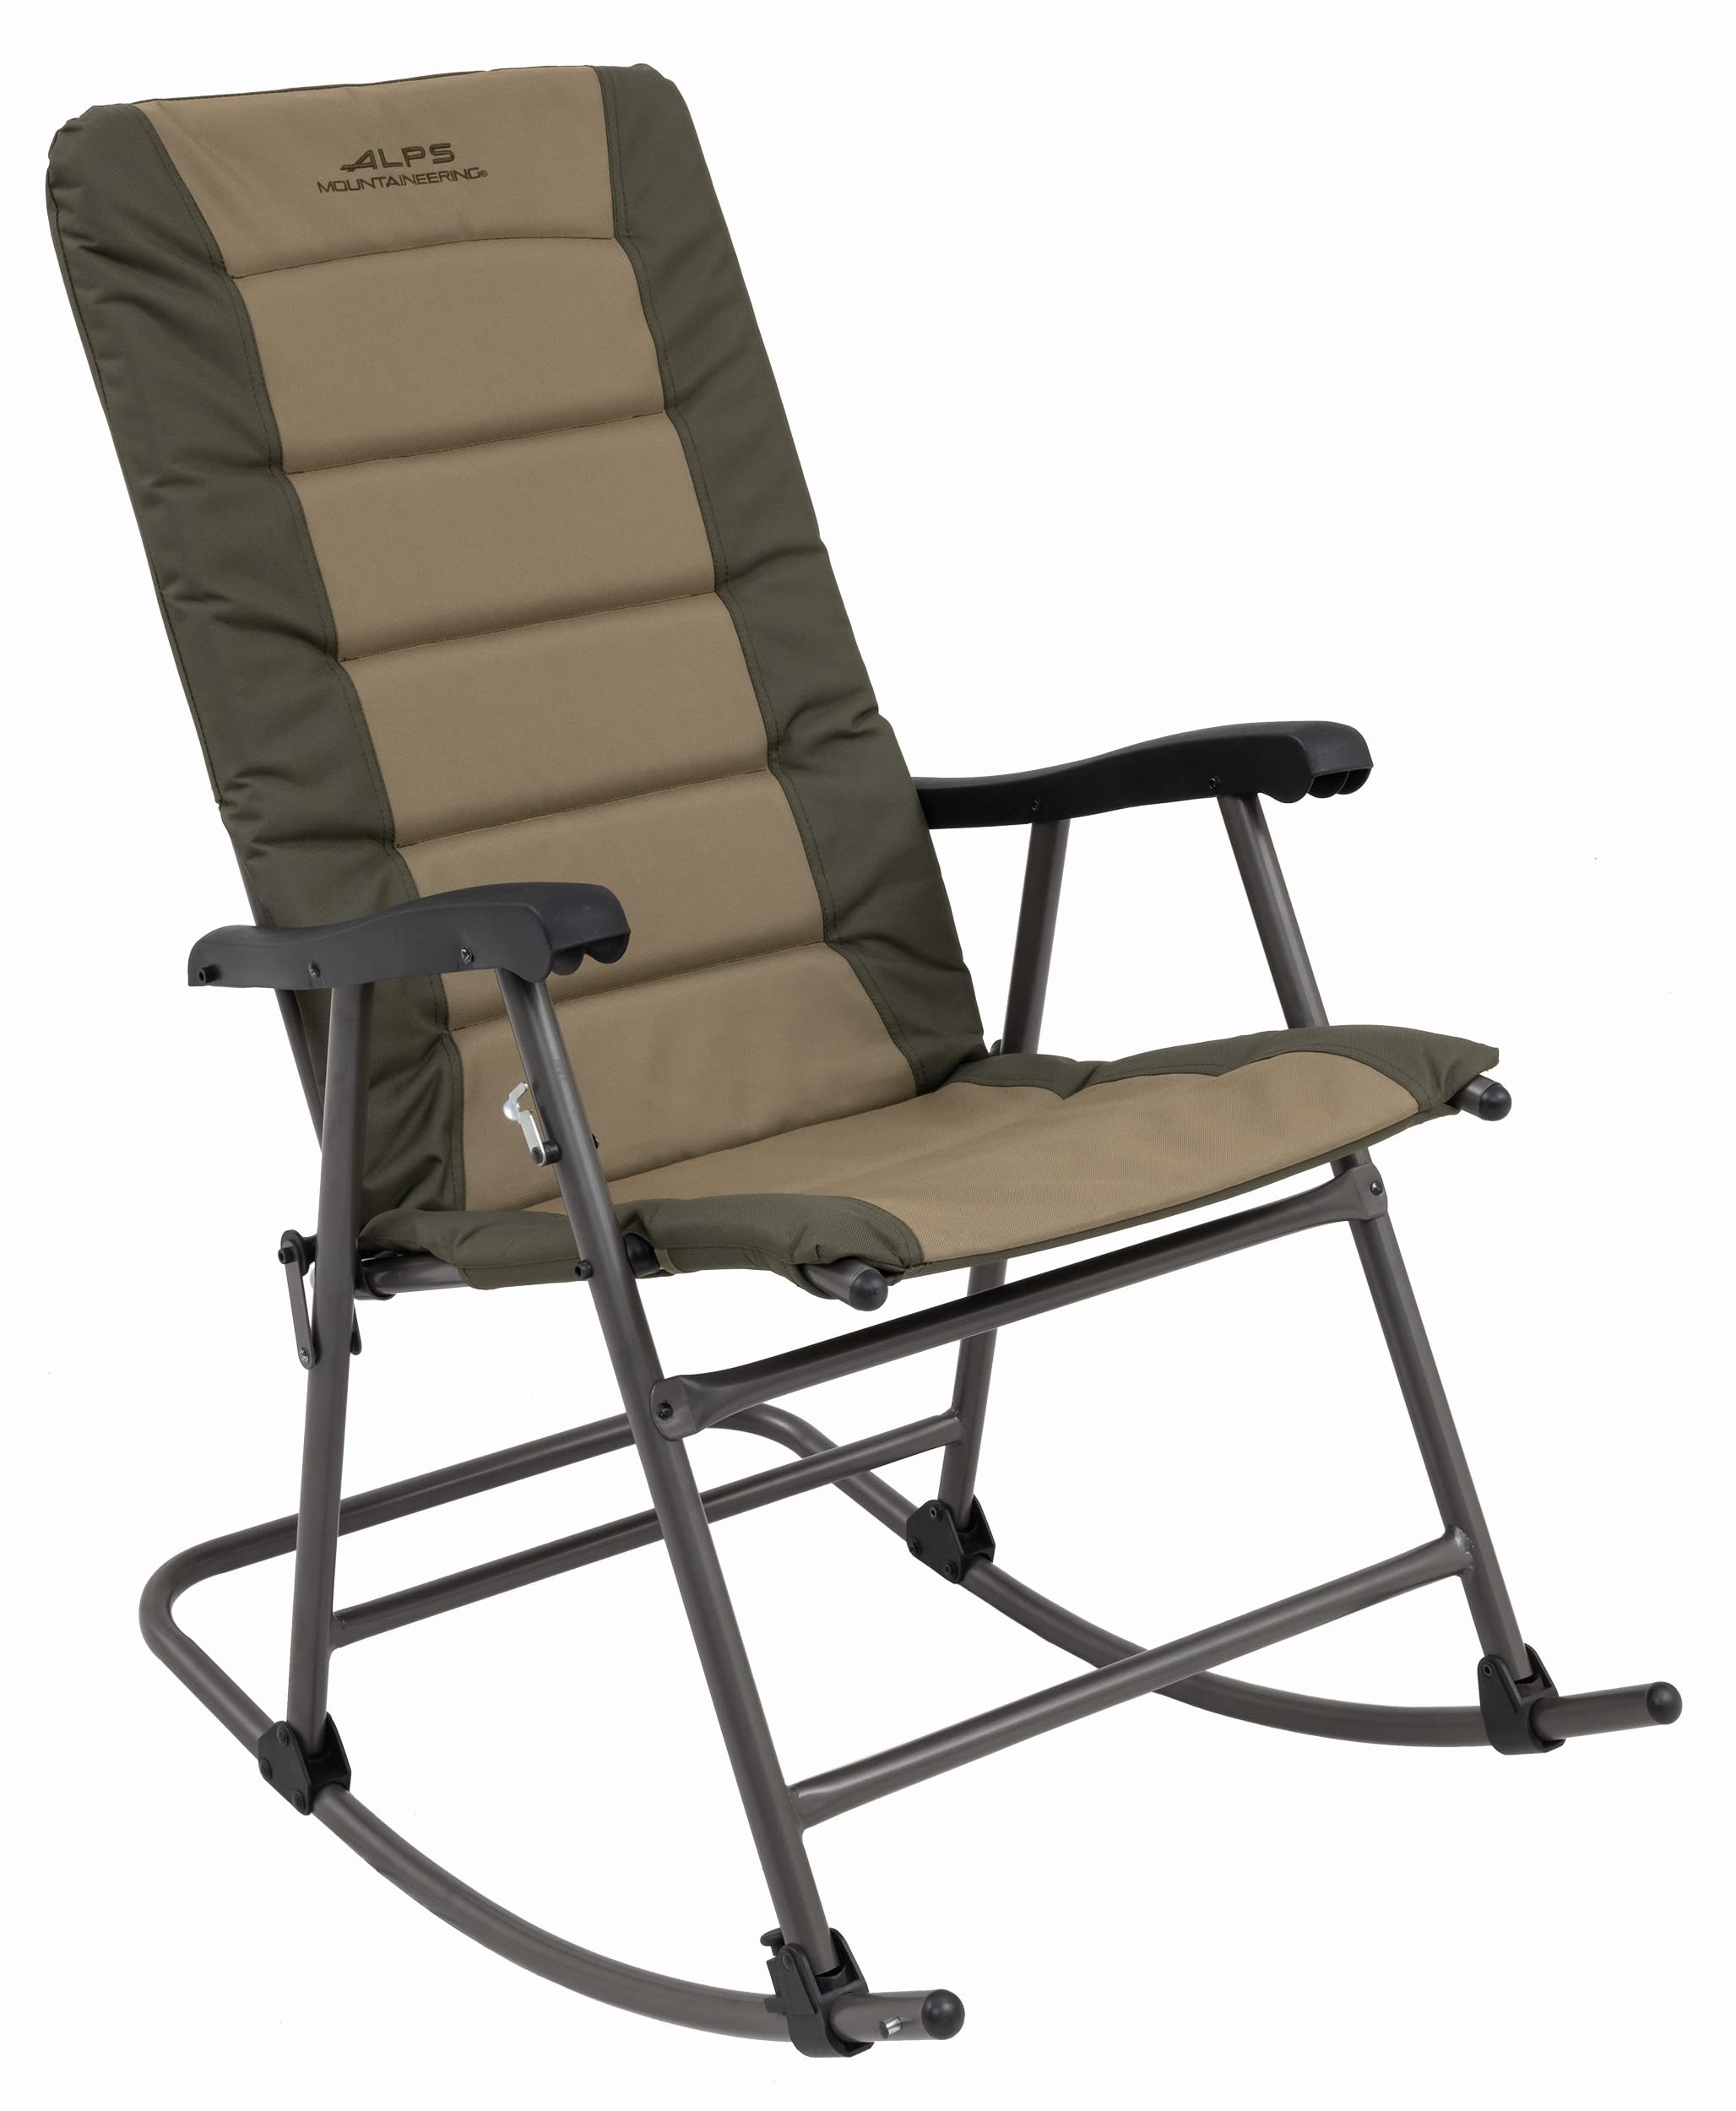 ALPS Mountaineering Rocking Camping Chair One Size ClayKhaki並行輸入品